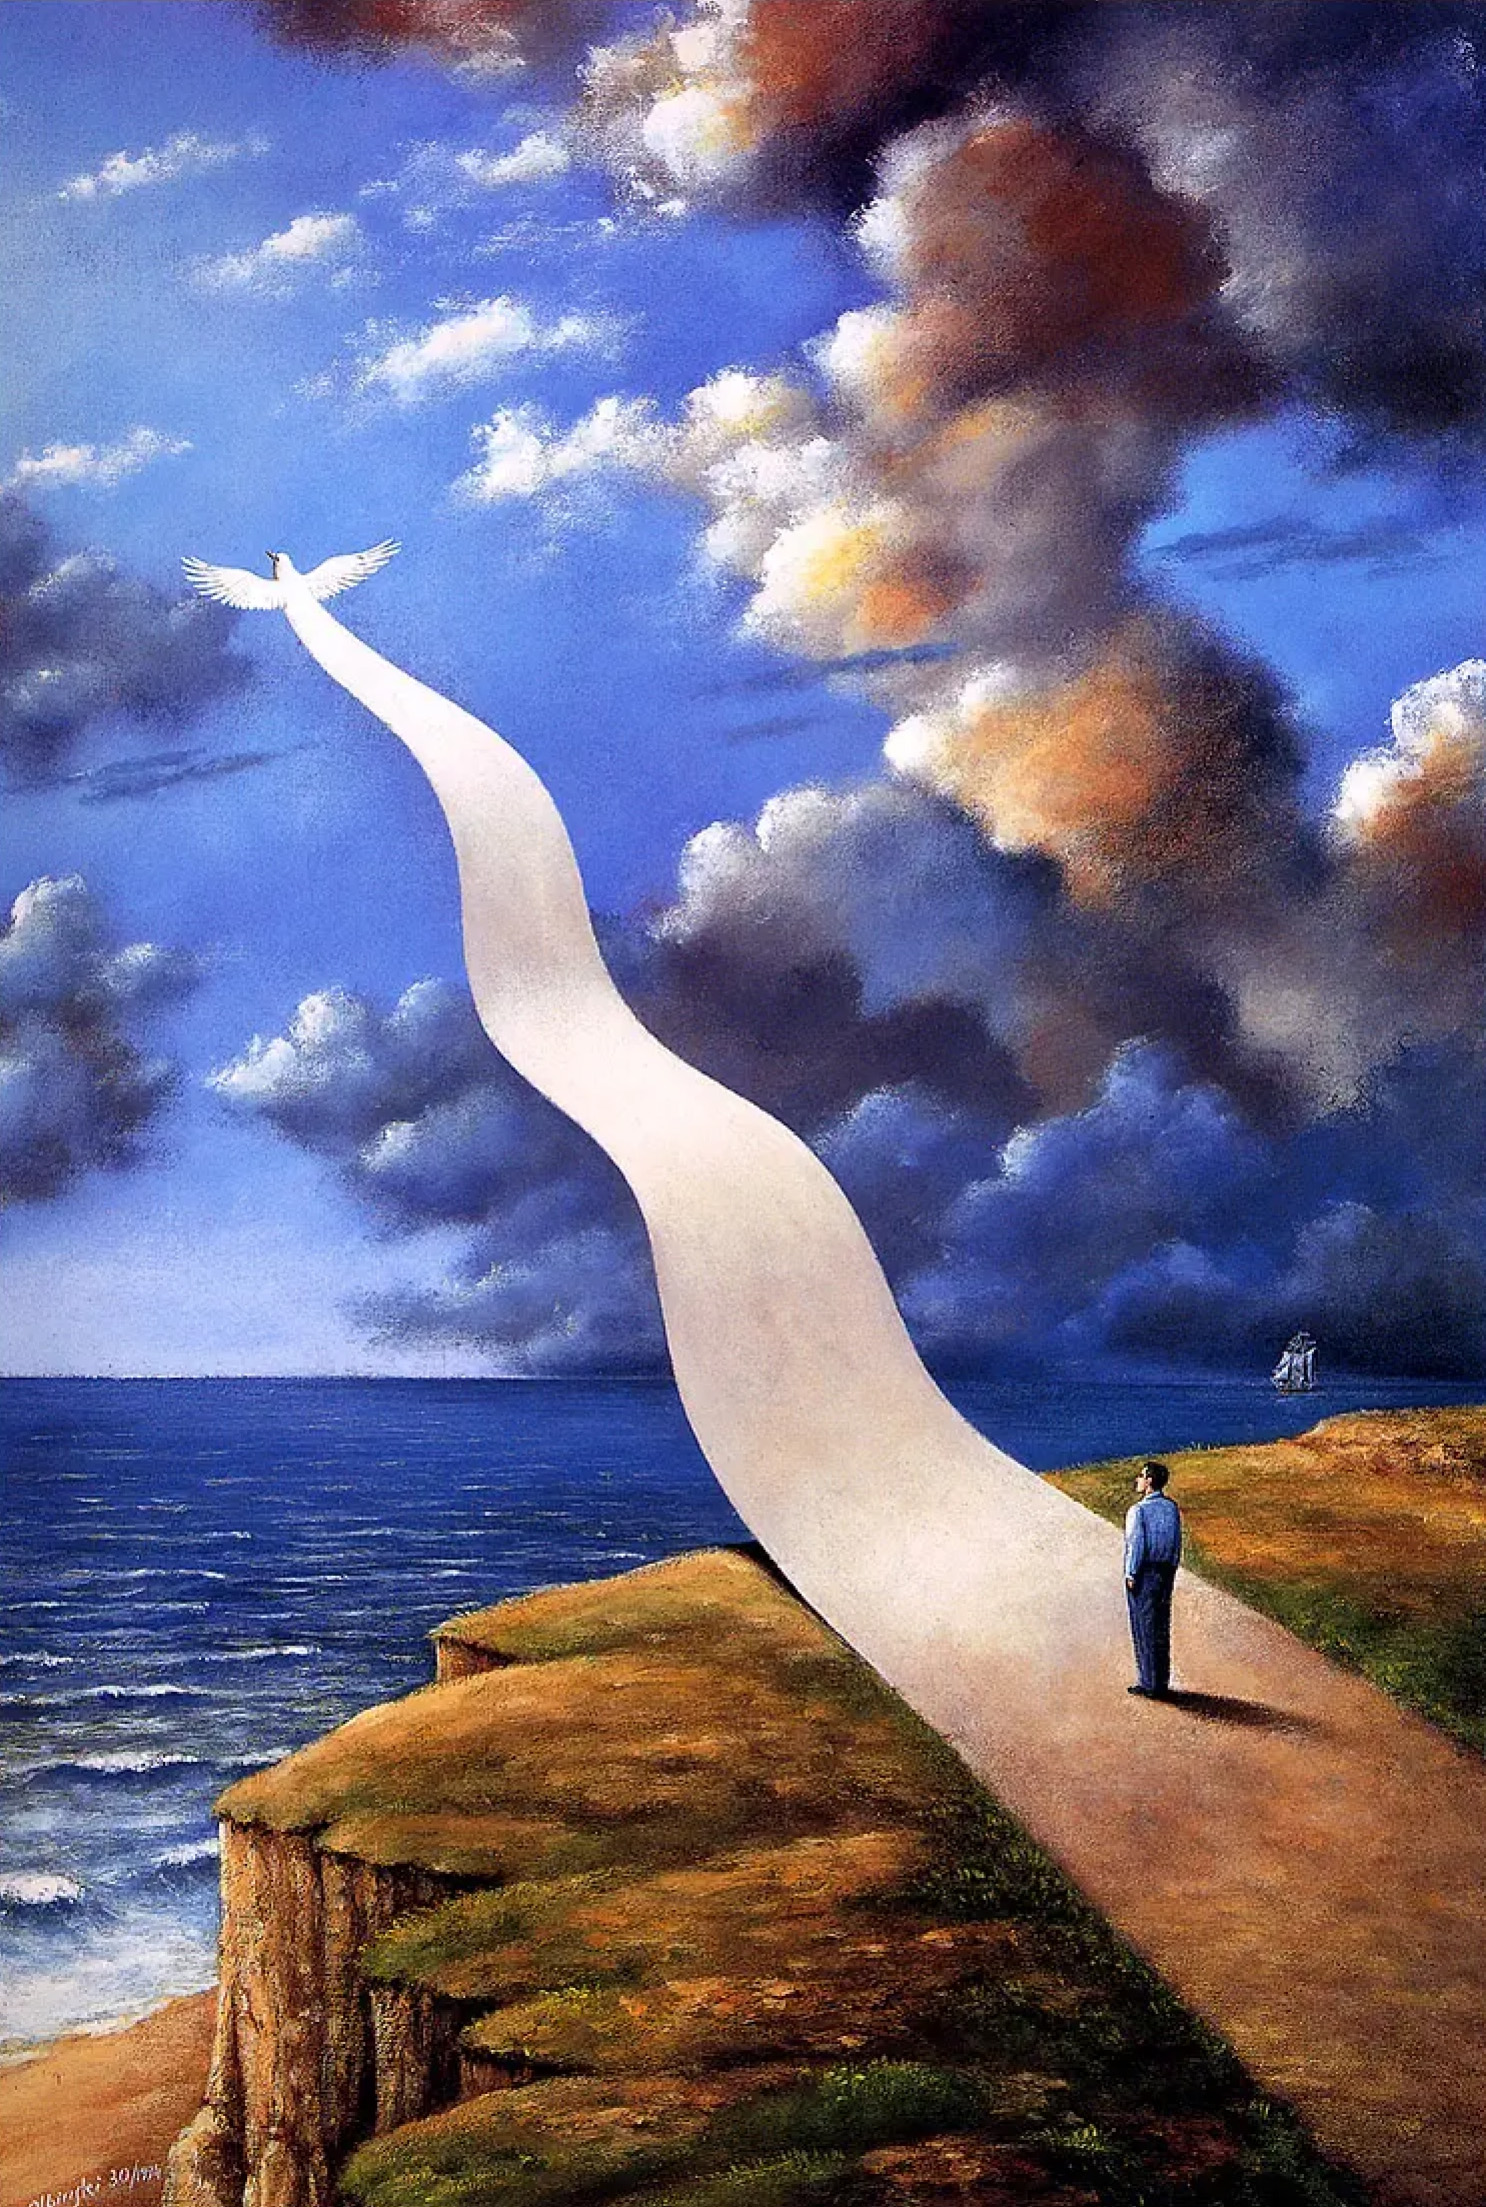 A painting of a man in a blue suit standing on the edge of a cliff, facing a giant white ribbon that curves from the ground to the sky. The ribbon has a small bird sitting on its end, high above the clouds. The painting has a surreal and dreamlike atmosphere, with a colorful sky and an ocean in the distance.